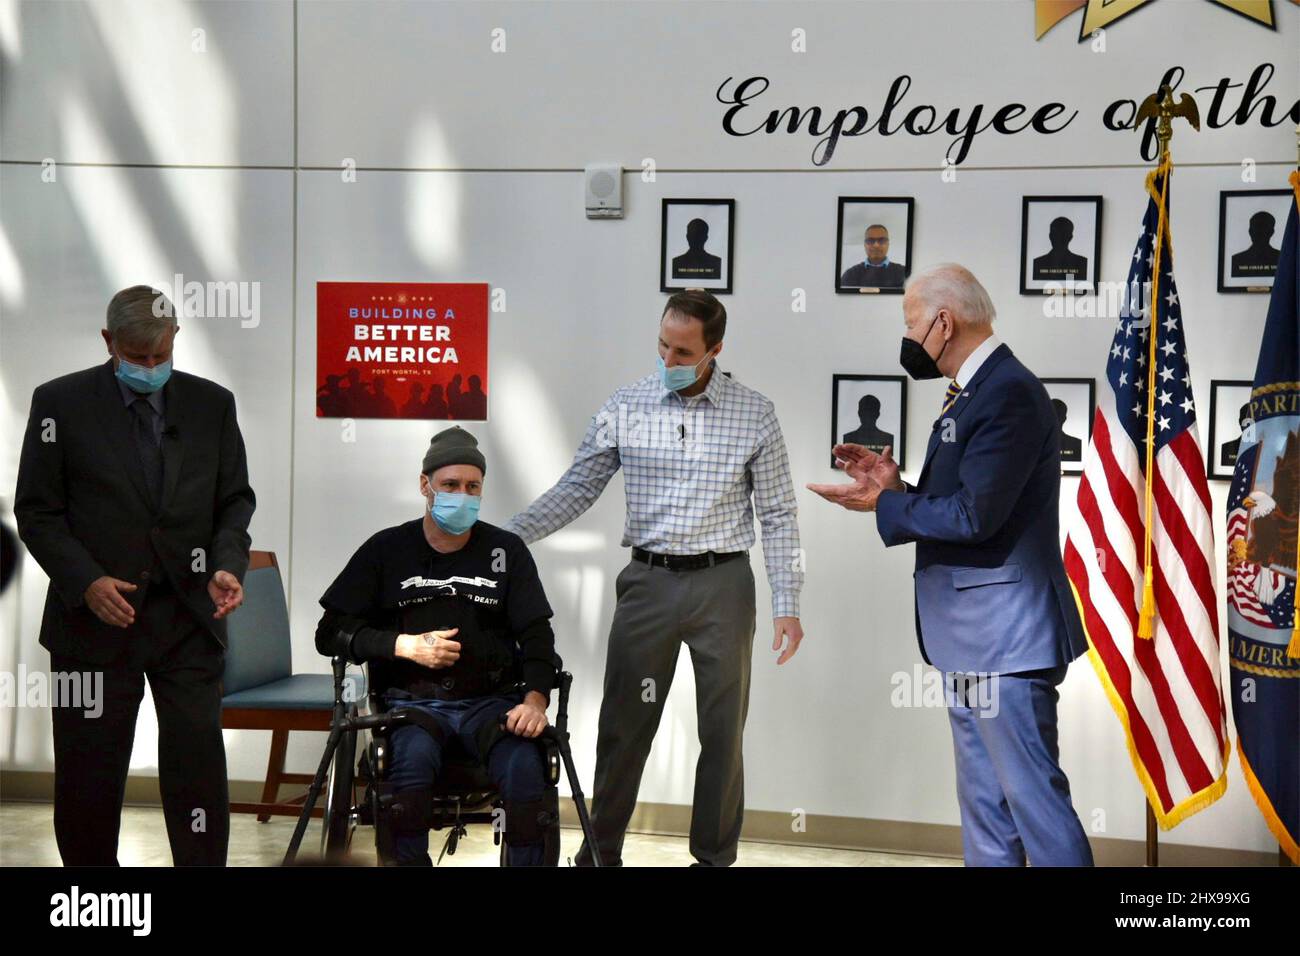 Fort Worth, United States of America. 08 March, 2022. U.S President Joe Biden applauds Army Veteran John Caruso after a display of his ability to walk using an Exoskeleton system assisted by Spinal Cord Injury lead physical therapist Josh Geering, center, at the North Texas Ft. Worth Veterans Clinic, March 8, 2022 in Fort Worth, Texas. Credit: Veterans Affairs/Veterans Affairs/Alamy Live News Stock Photo